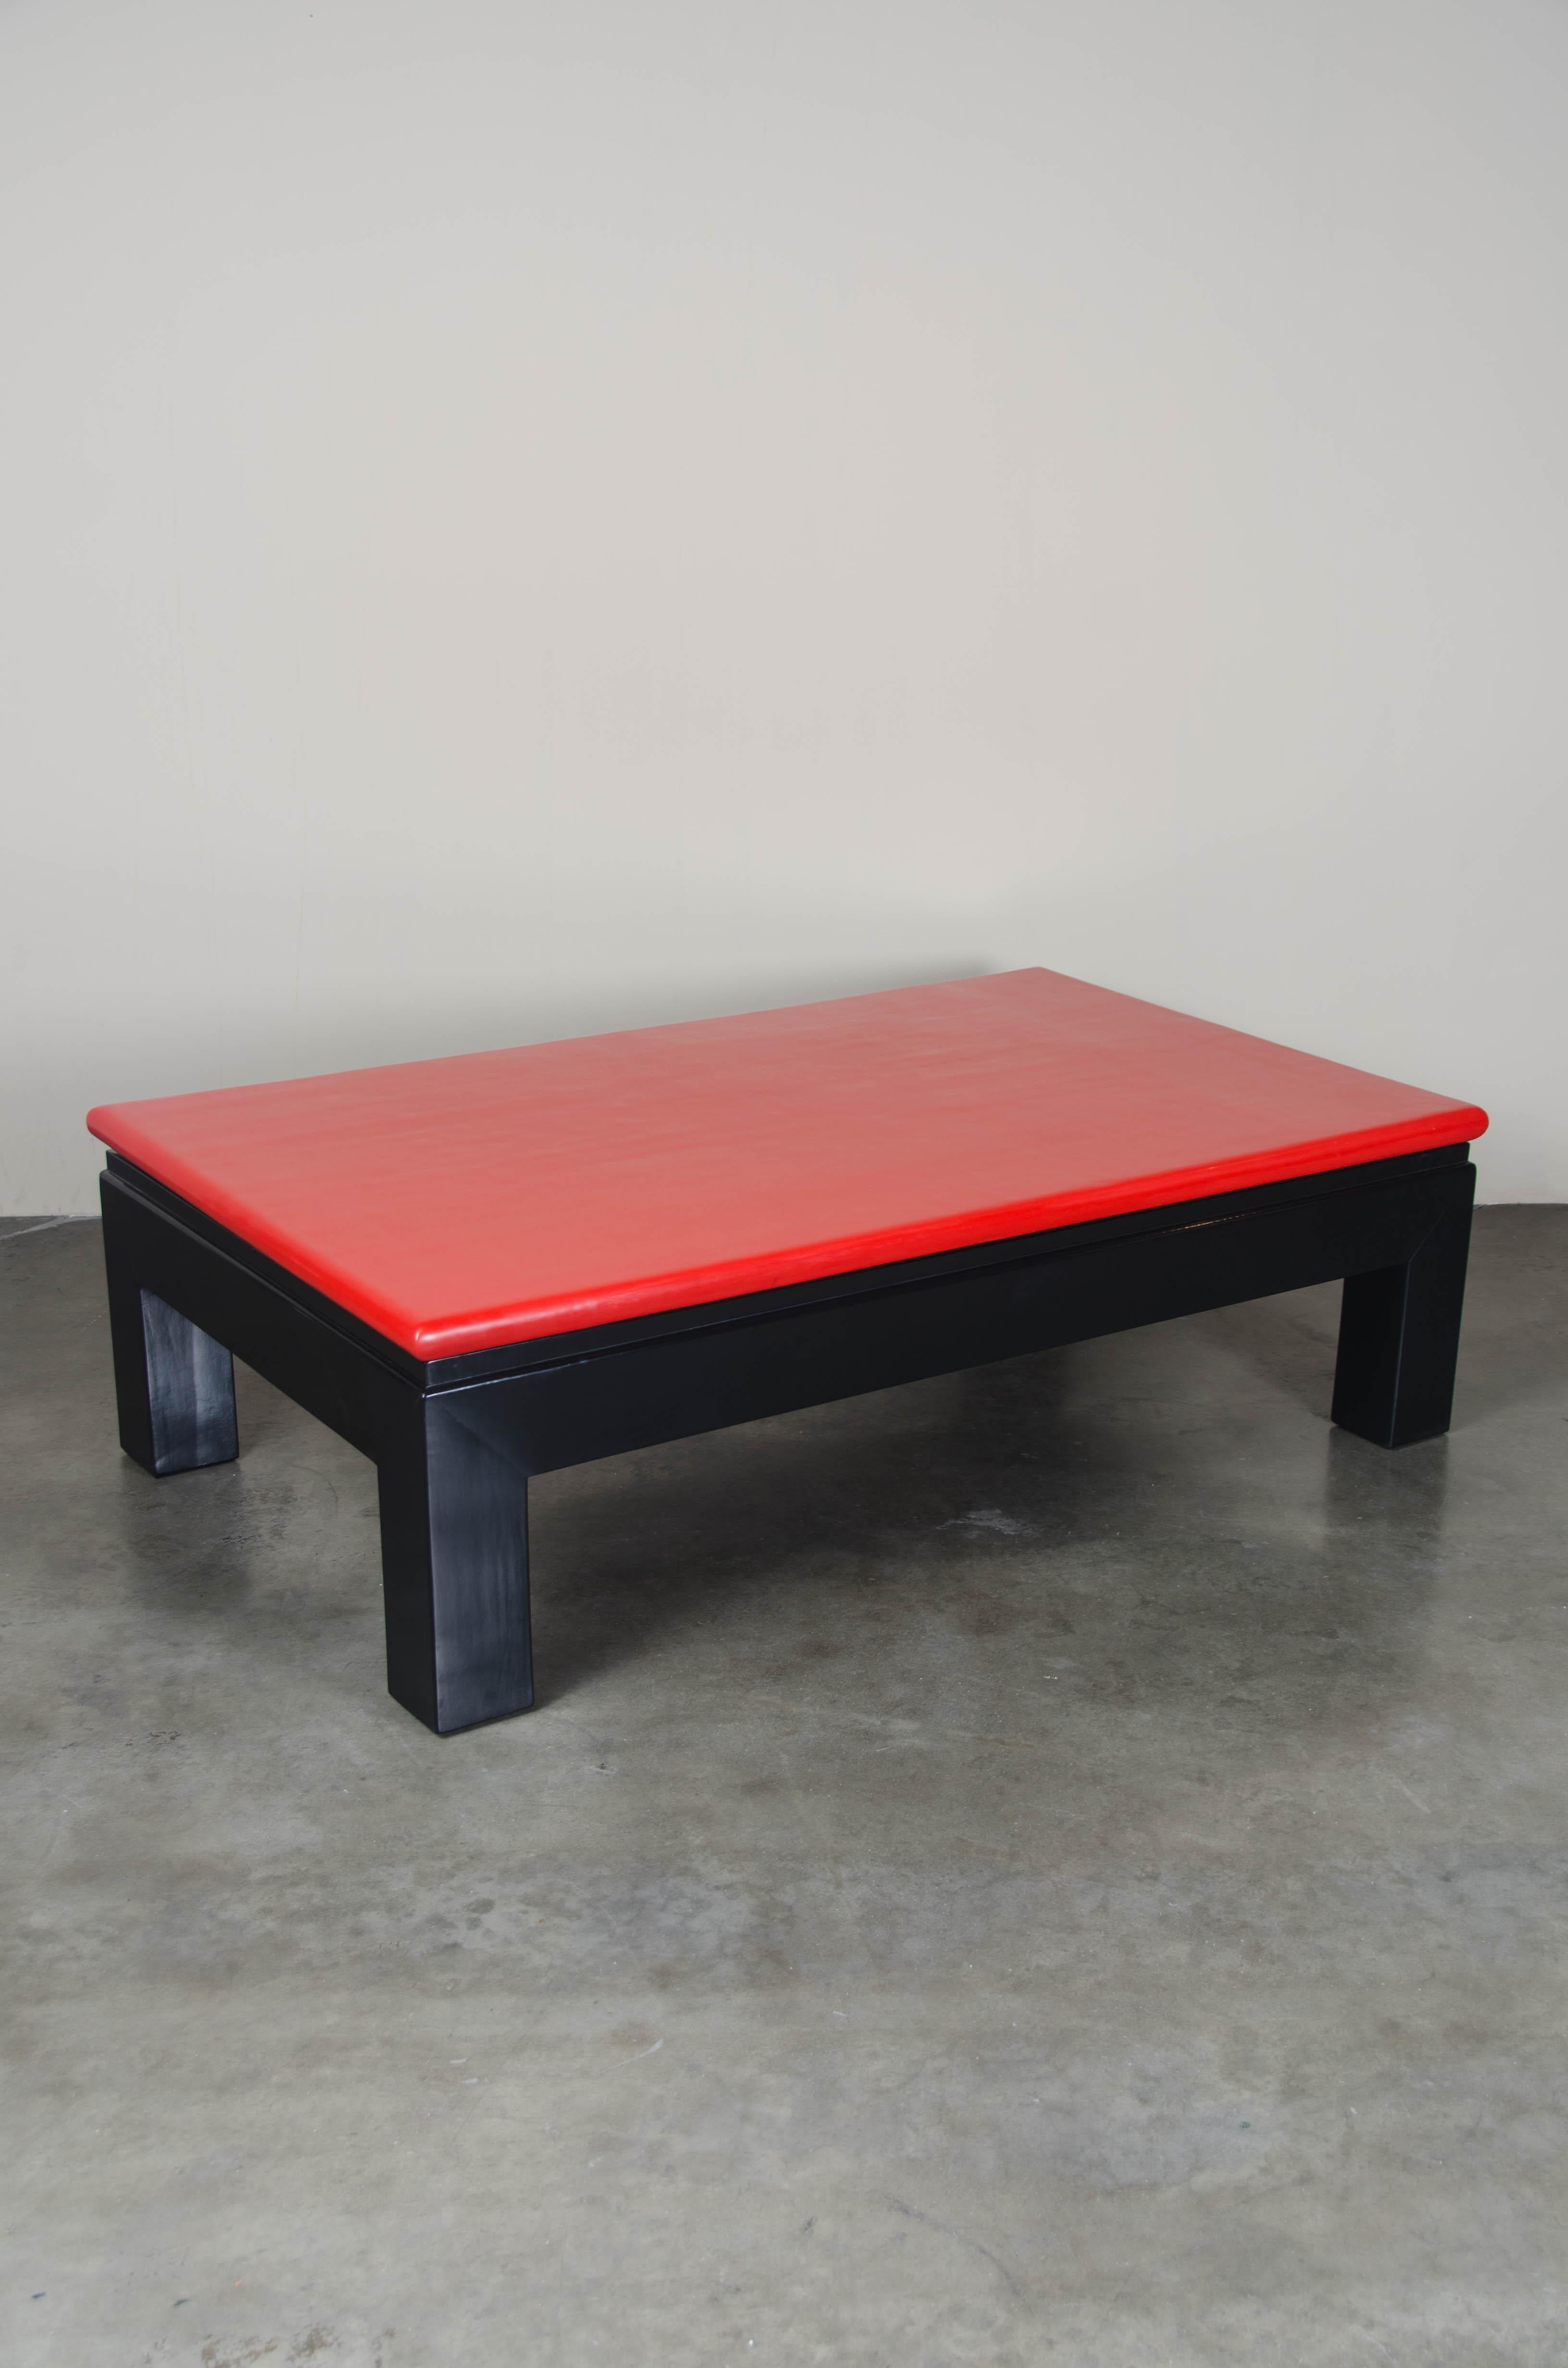 Lacquered Ming Coffee Table, Red Lacquer by Robert Kuo, Handmade, Limited Edition For Sale